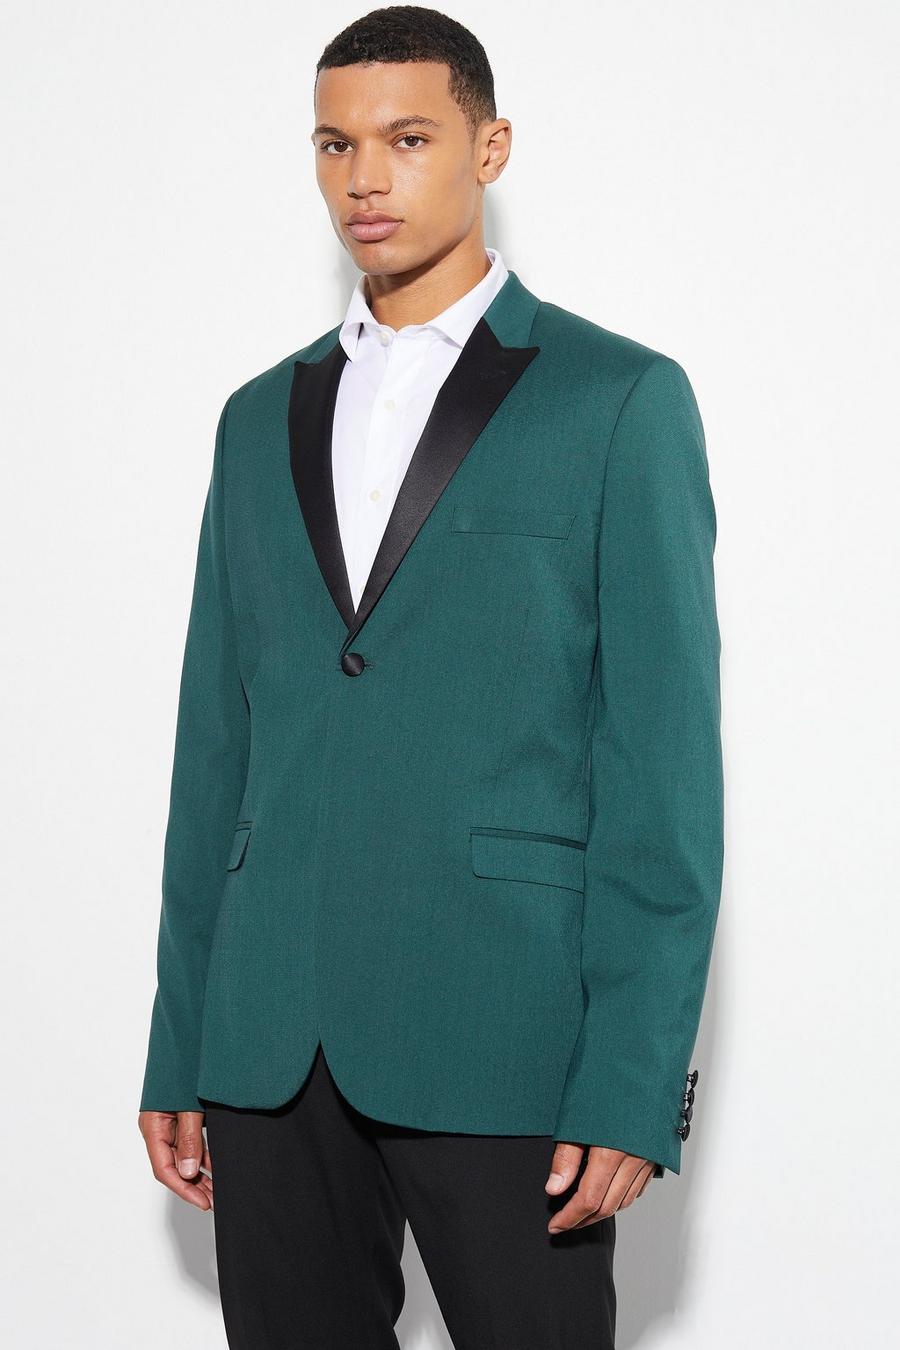 Forest vert Tall Skinny Tuxedo Single Breasted Suit Jacket